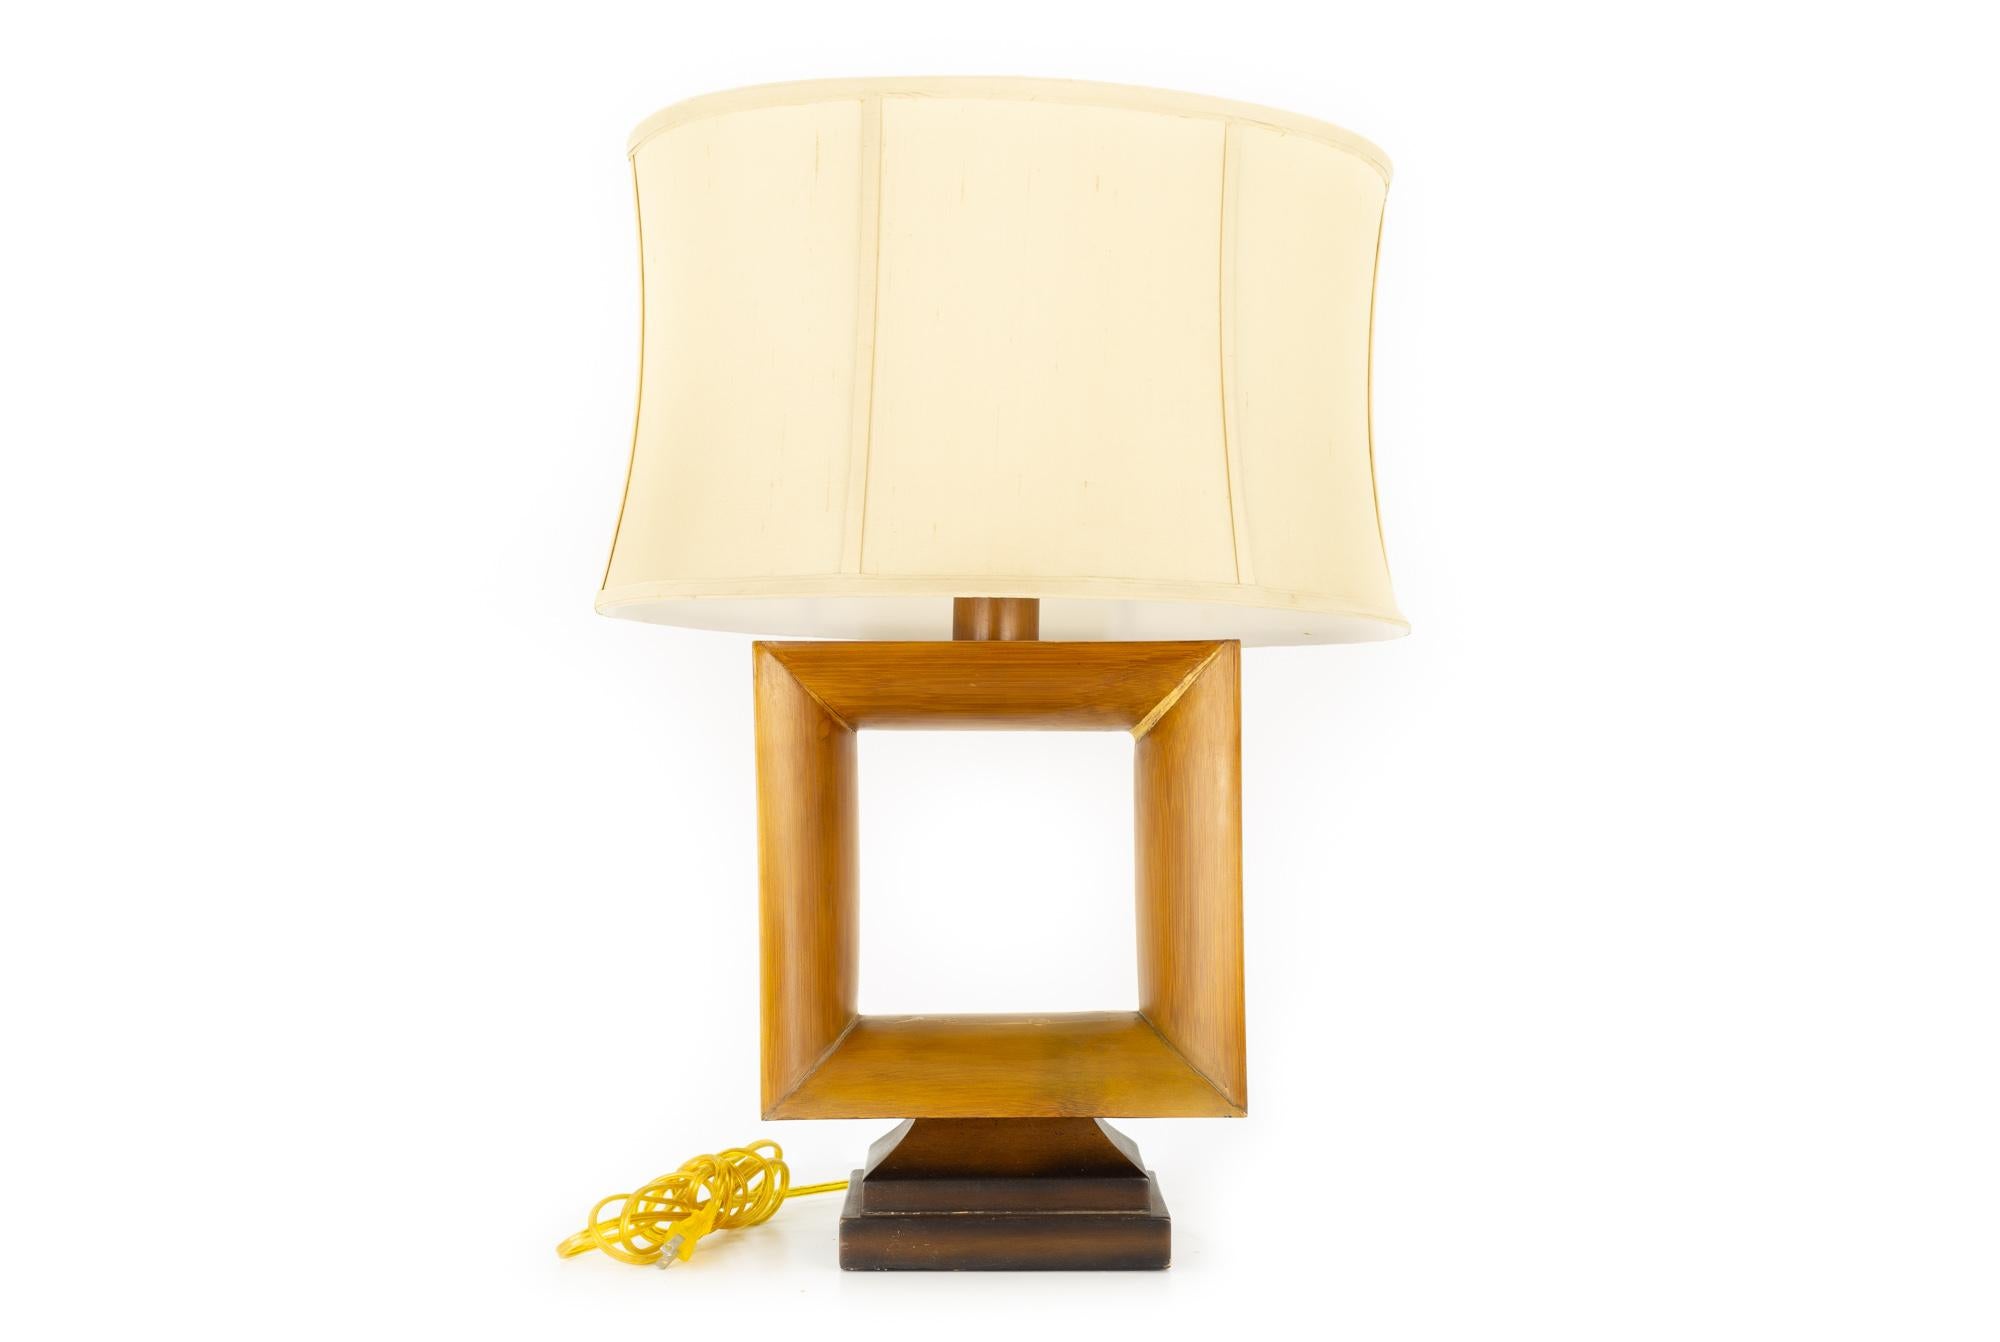 The natural light mid century square open window table lamp

This lamp measures: 11 wide x 5.5 deep x 27.5 inches high

This lamp is in great vintage condition with some wear on the wood

We take our photos in a controlled lighting studio to